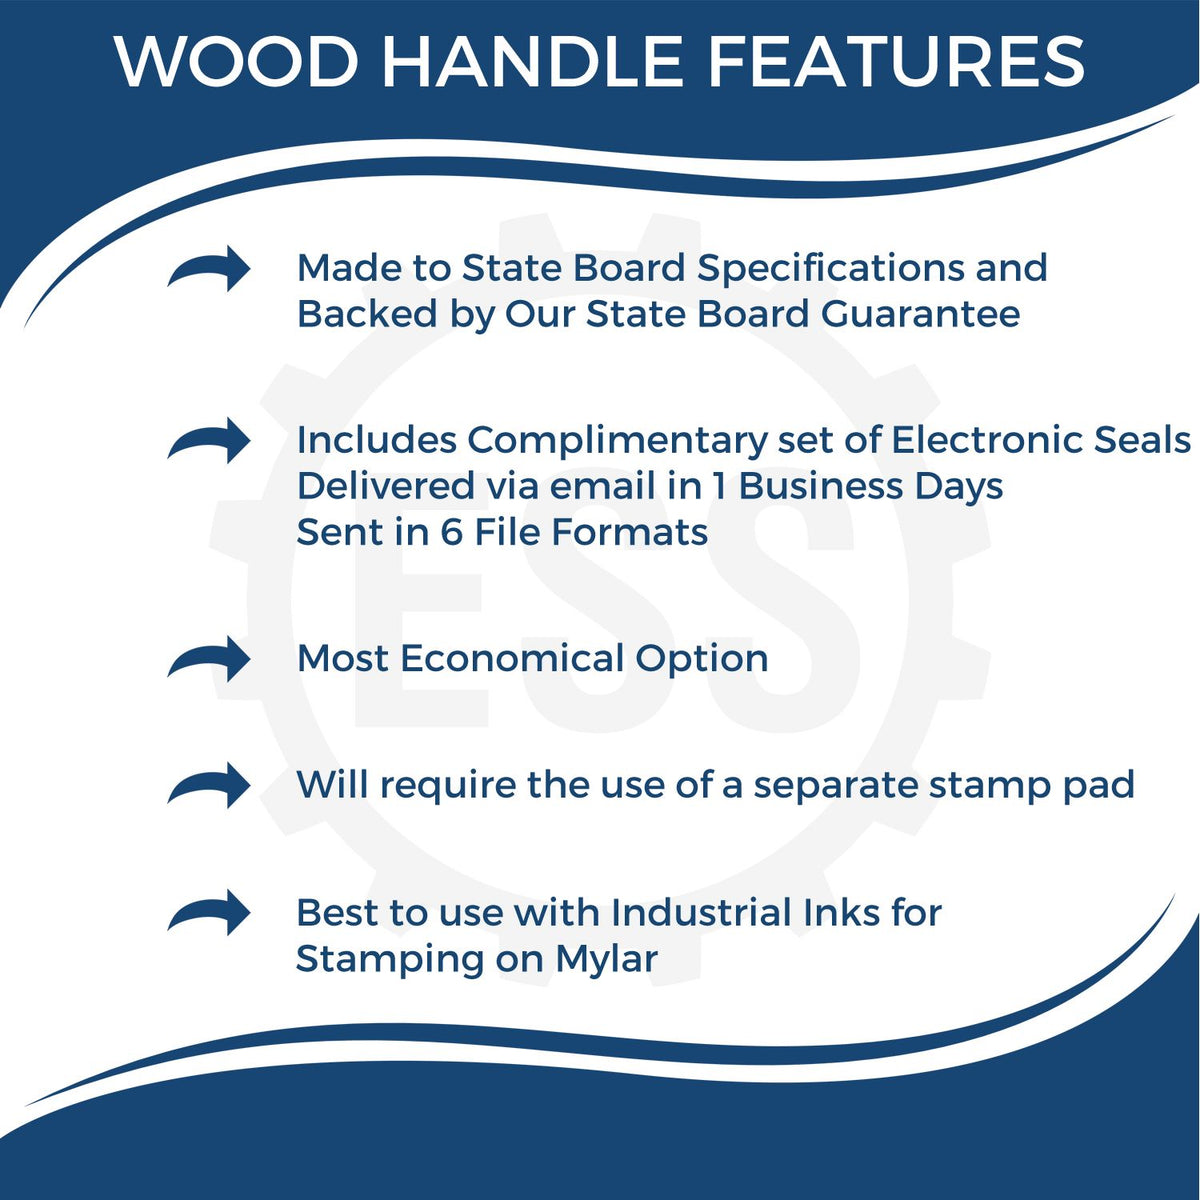 A picture of an infographic highlighting the selling points for the Wooden Handle Rhode Island Rectangular Notary Public Stamp